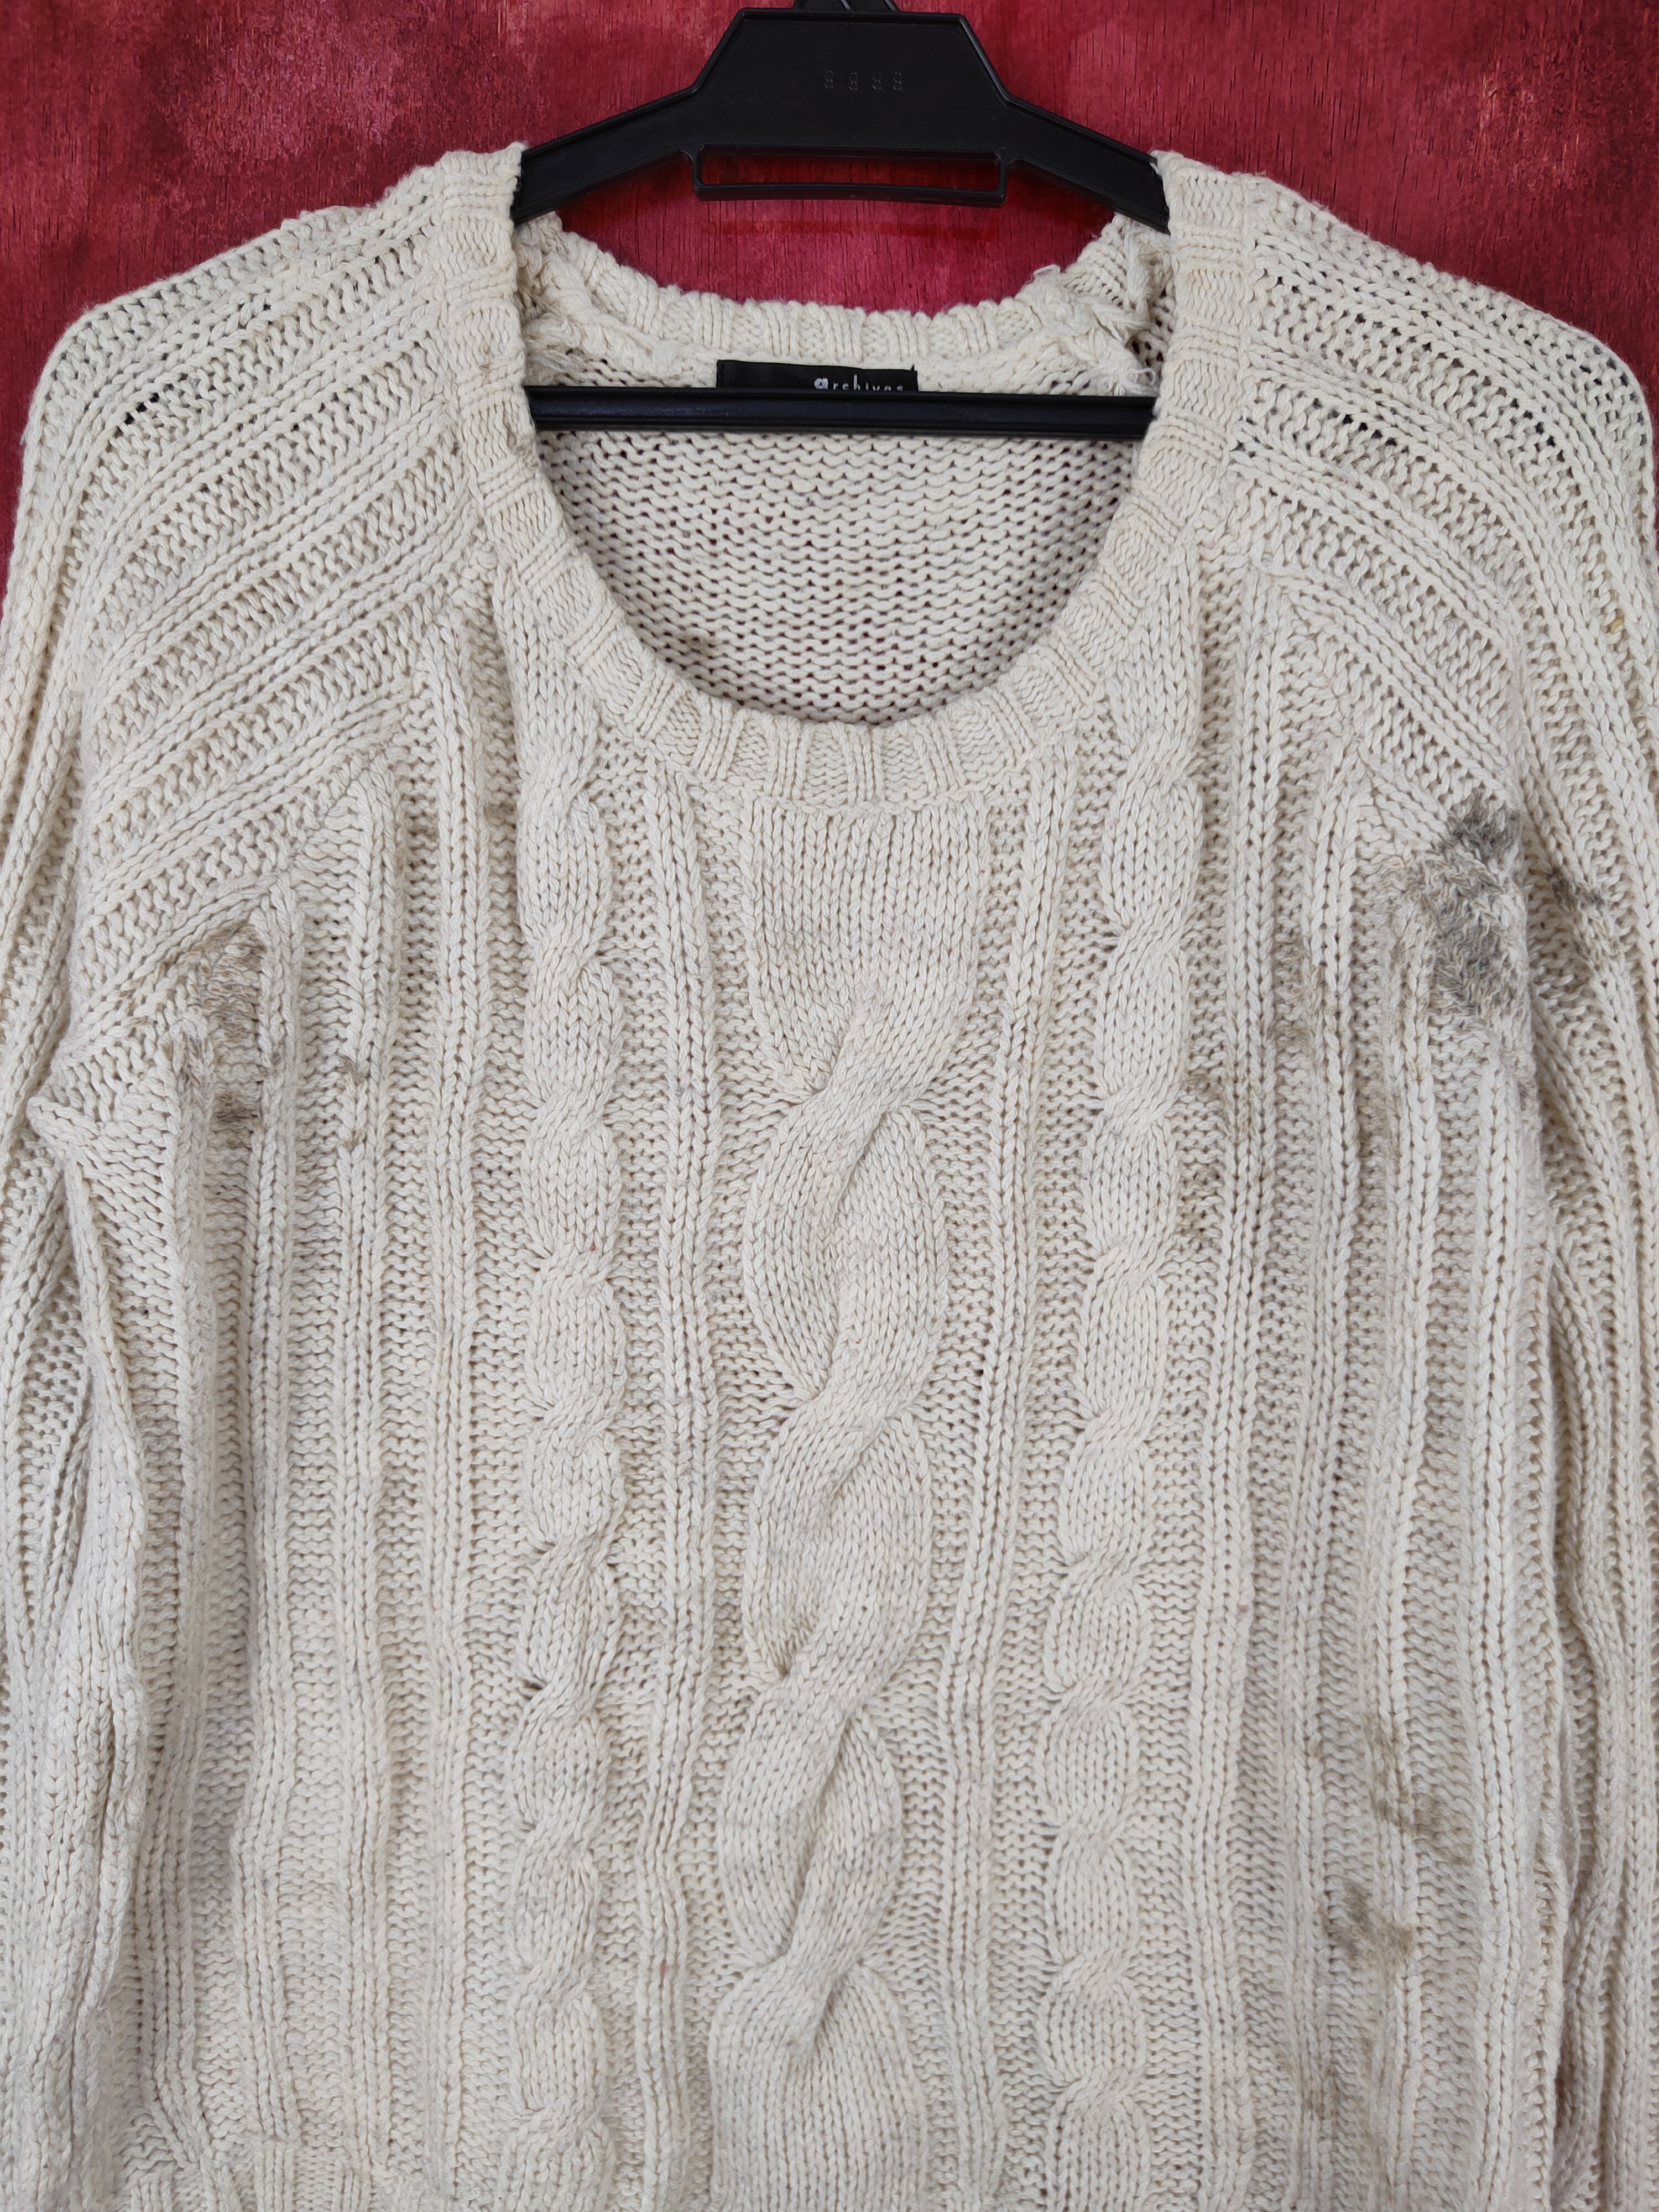 Japanese Brand - Archives White Knitwear Sweater Damage With Stain - 2